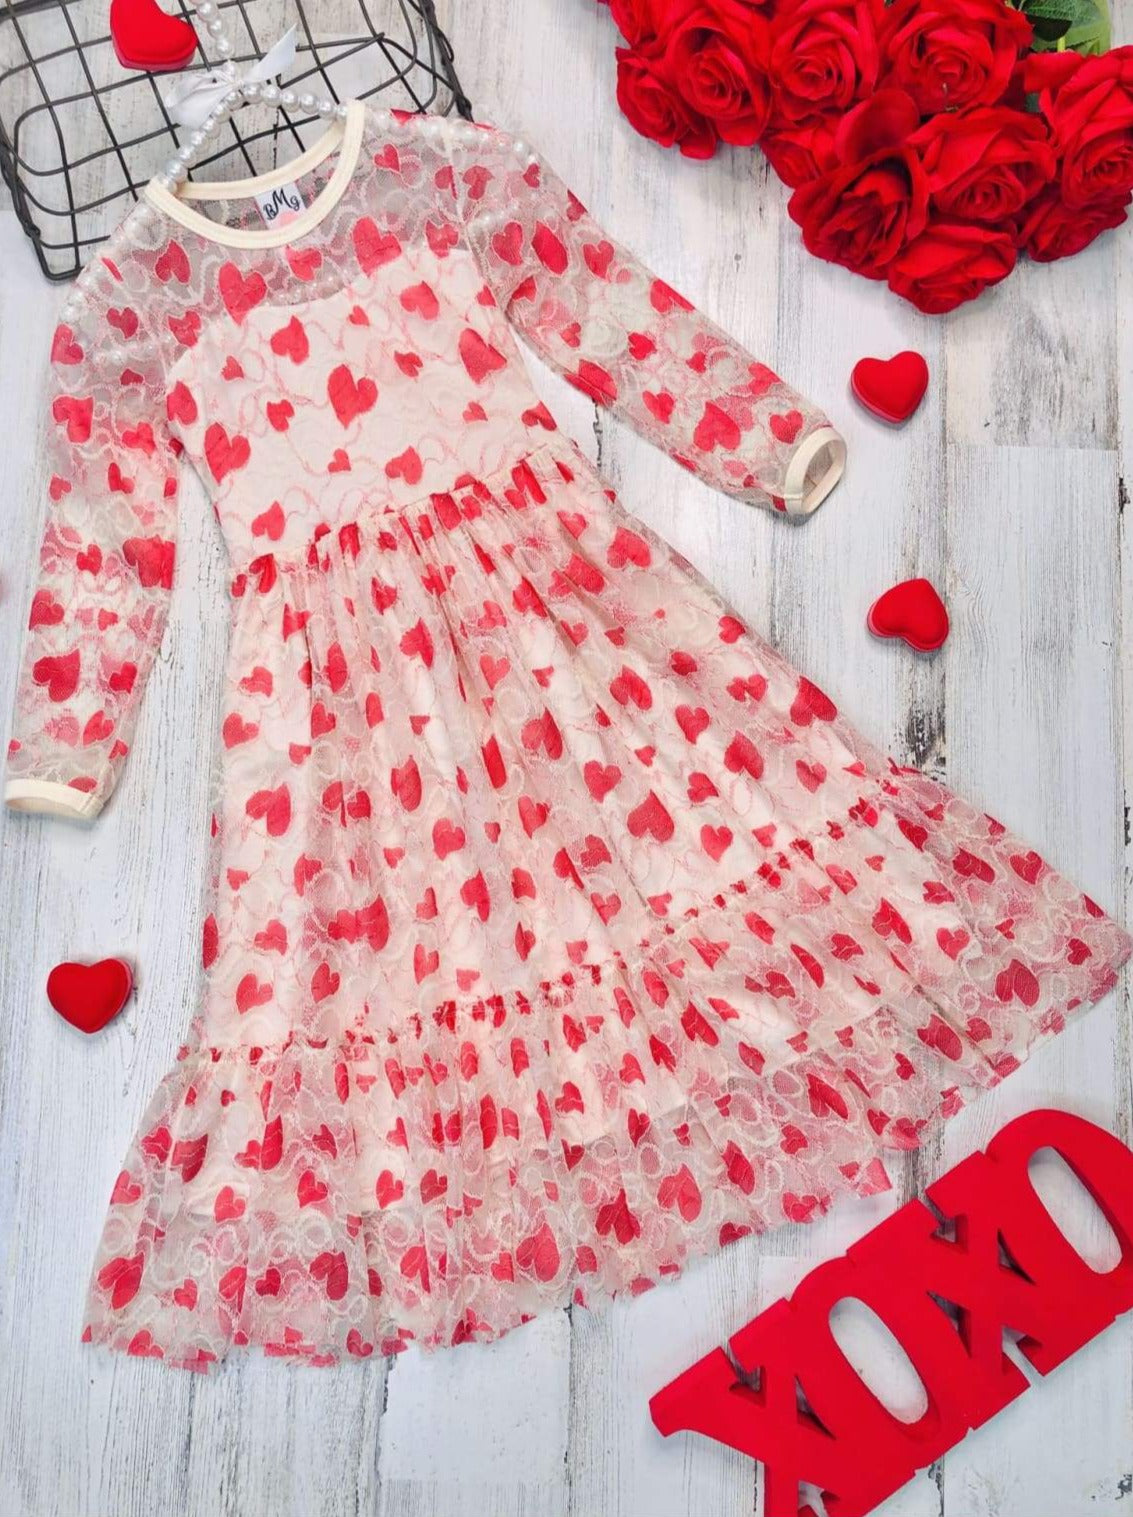 Toddler Valentine's Day Dress | Girls Long Sleeve Heart Lace Dress